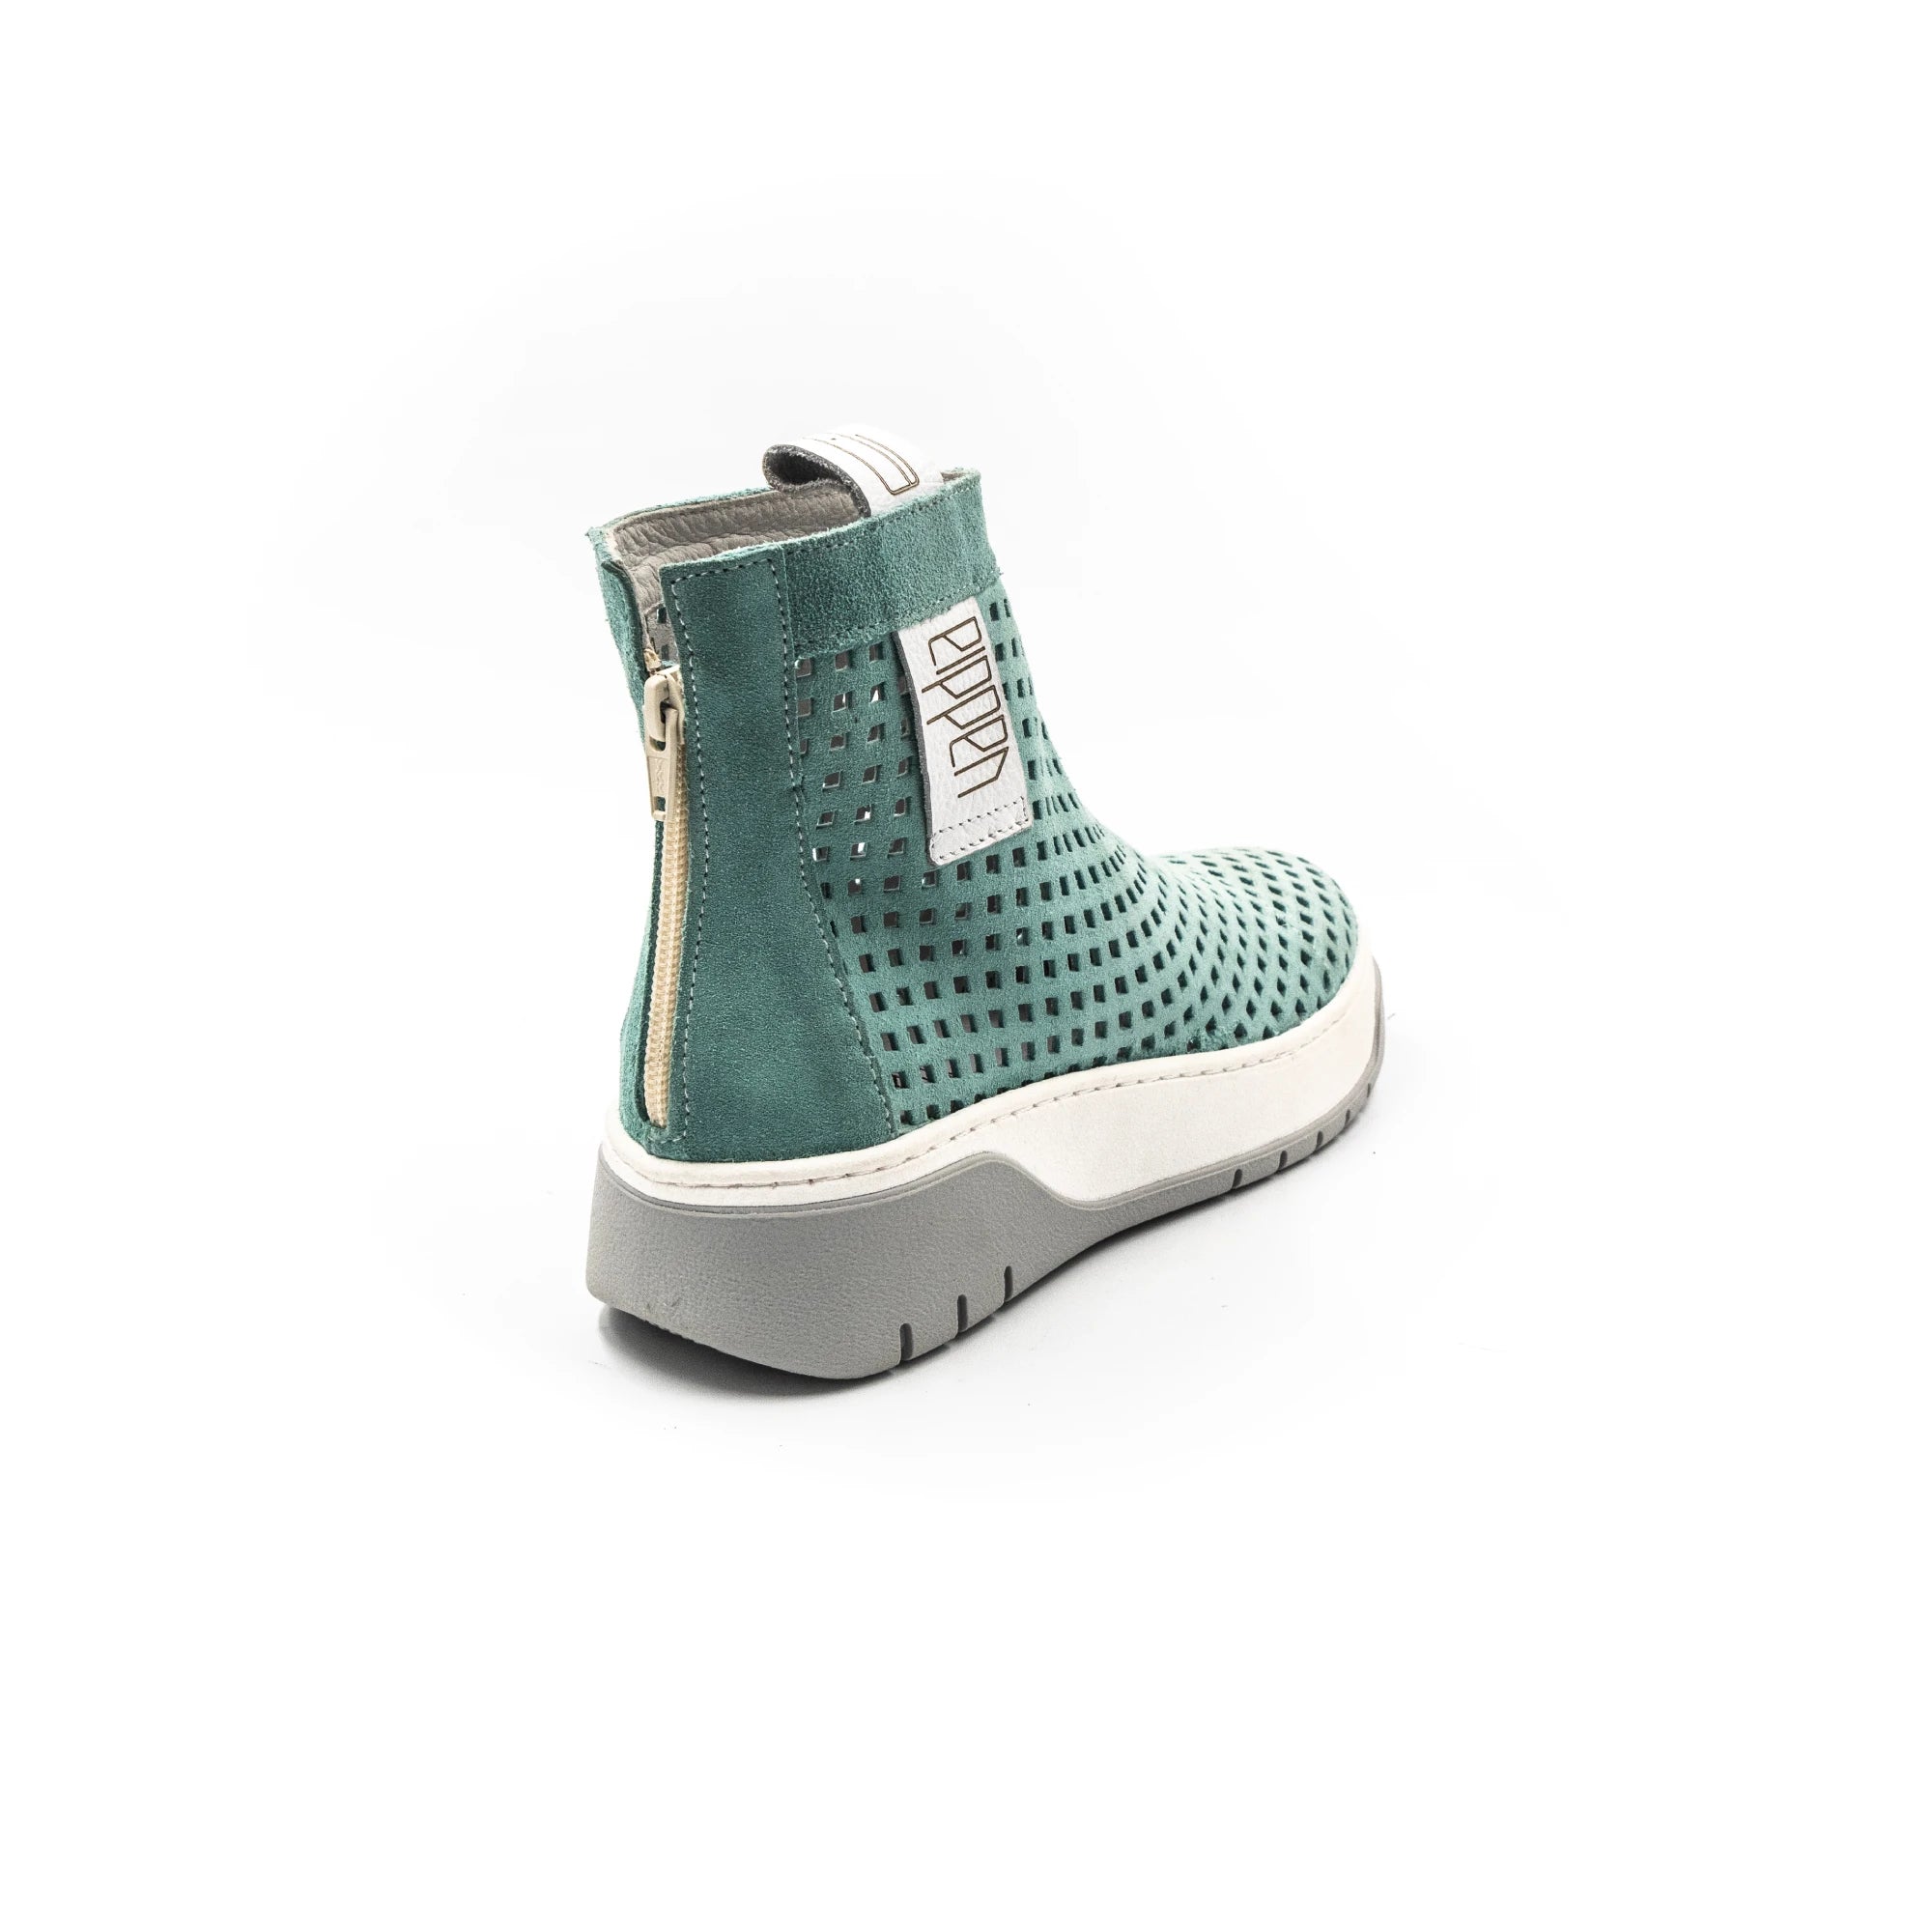 Perforated boots, blue color.